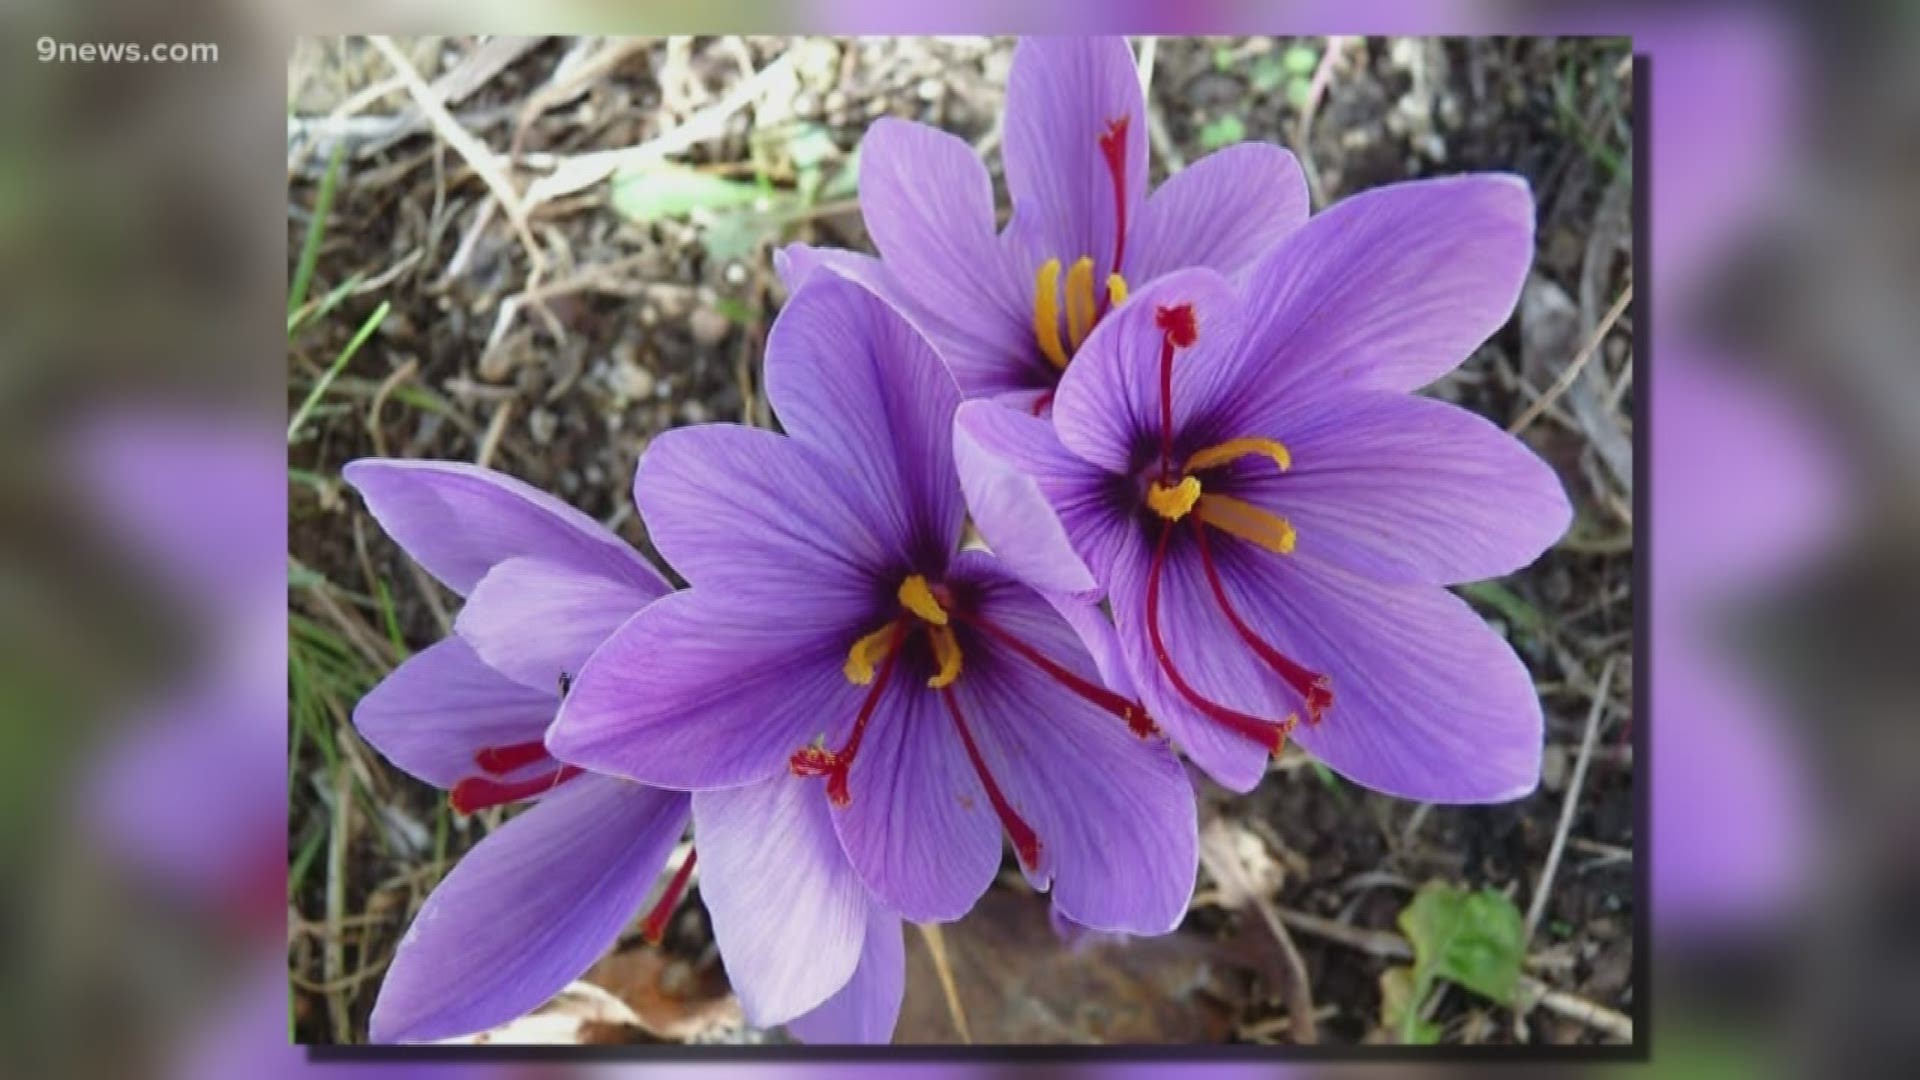 Saffron has been highly prized since ancient times. Cleopatra soaked in saffron bath water to dye her skin--an early precursor of the spray tan.